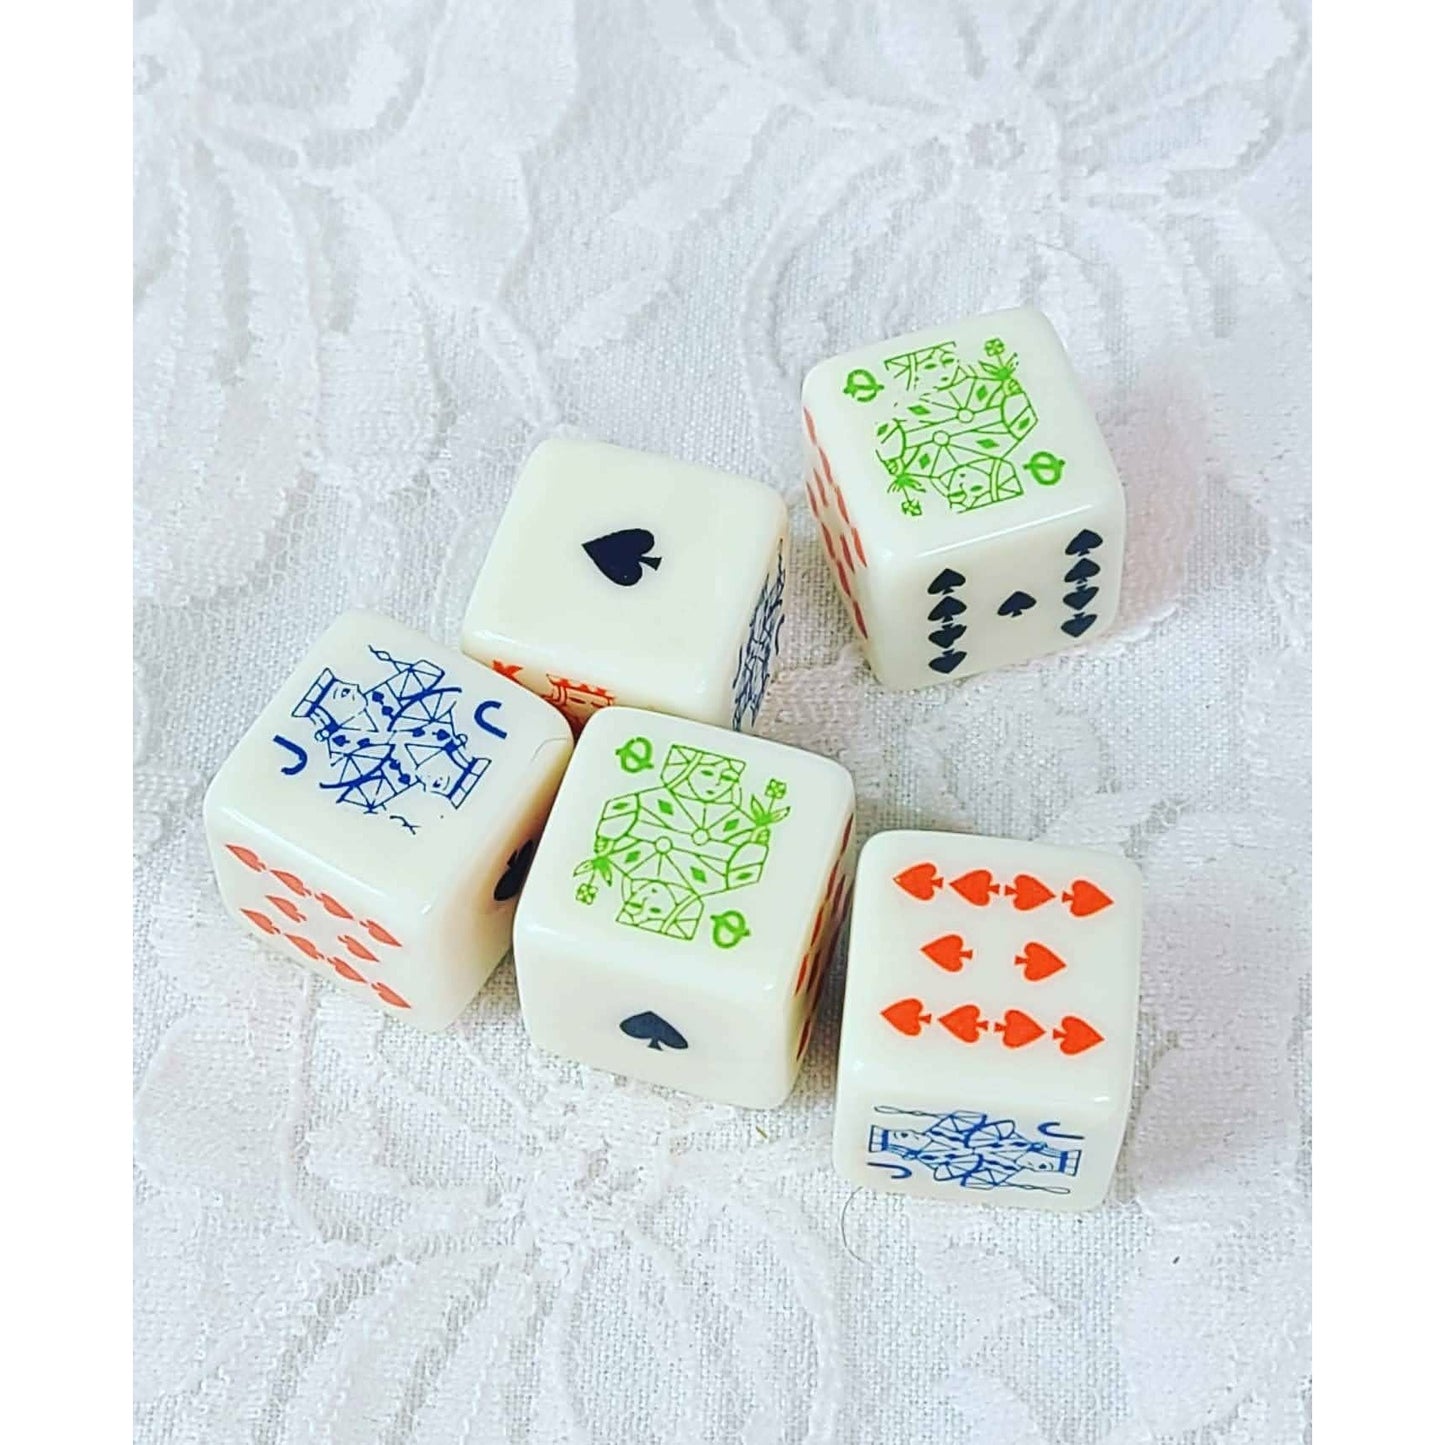 Fathers Day Gift ~ Vintage Mid Century Poker Dice in Silk Bag  ~ Gift for Grandpa, Gift for Dad ~ Collectible Antique Dice